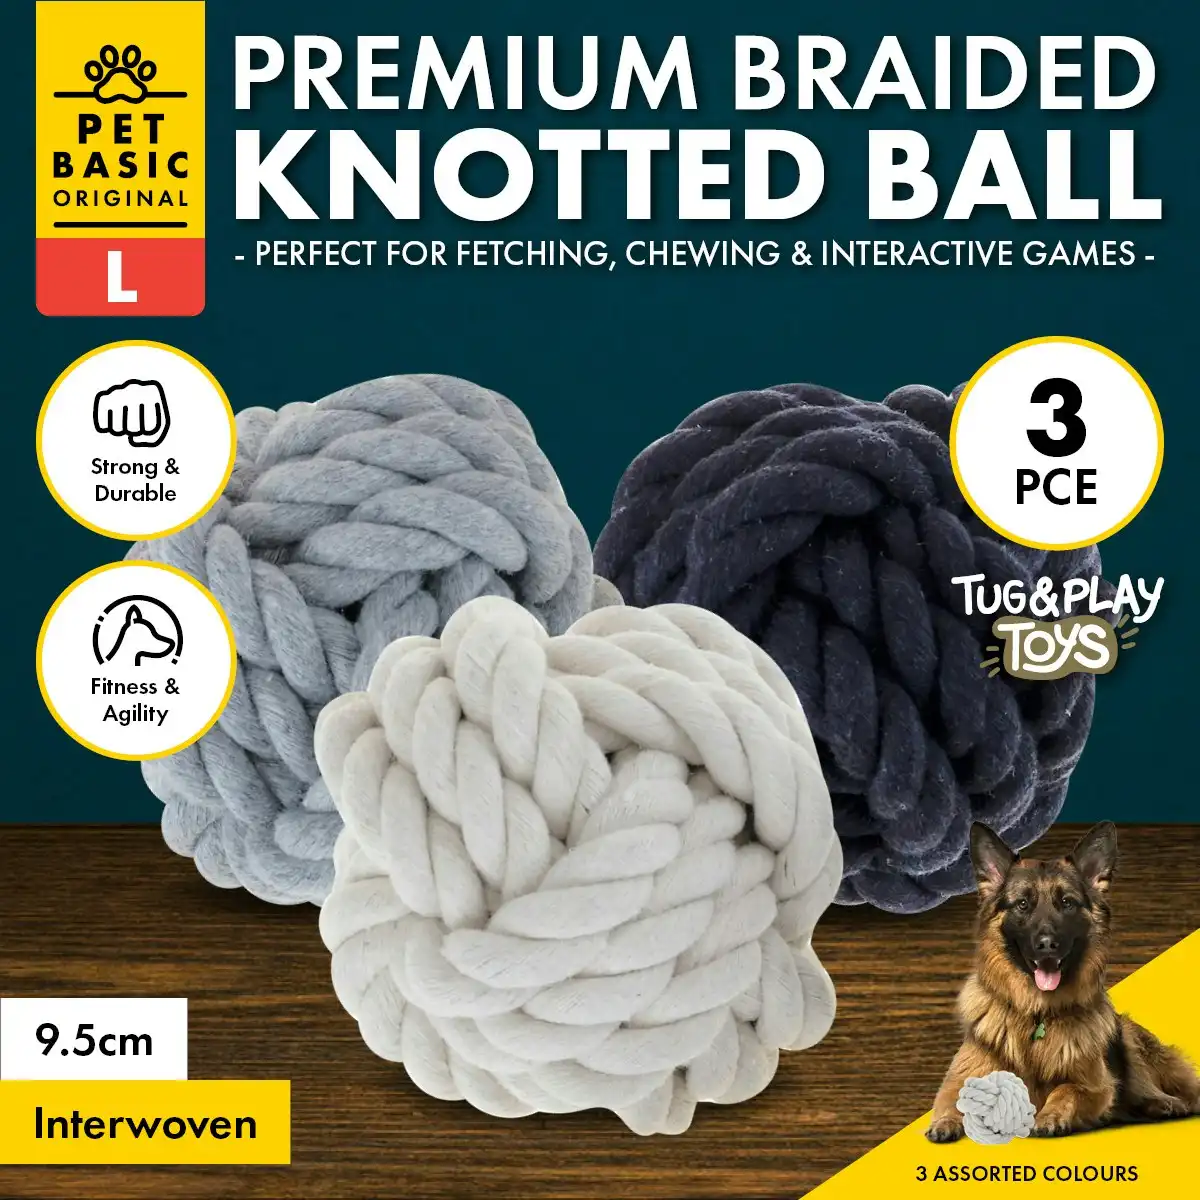 Pet Basic 3PCE Premium Braided Knotted Ball Size Large Natural Fibres 9.5cm